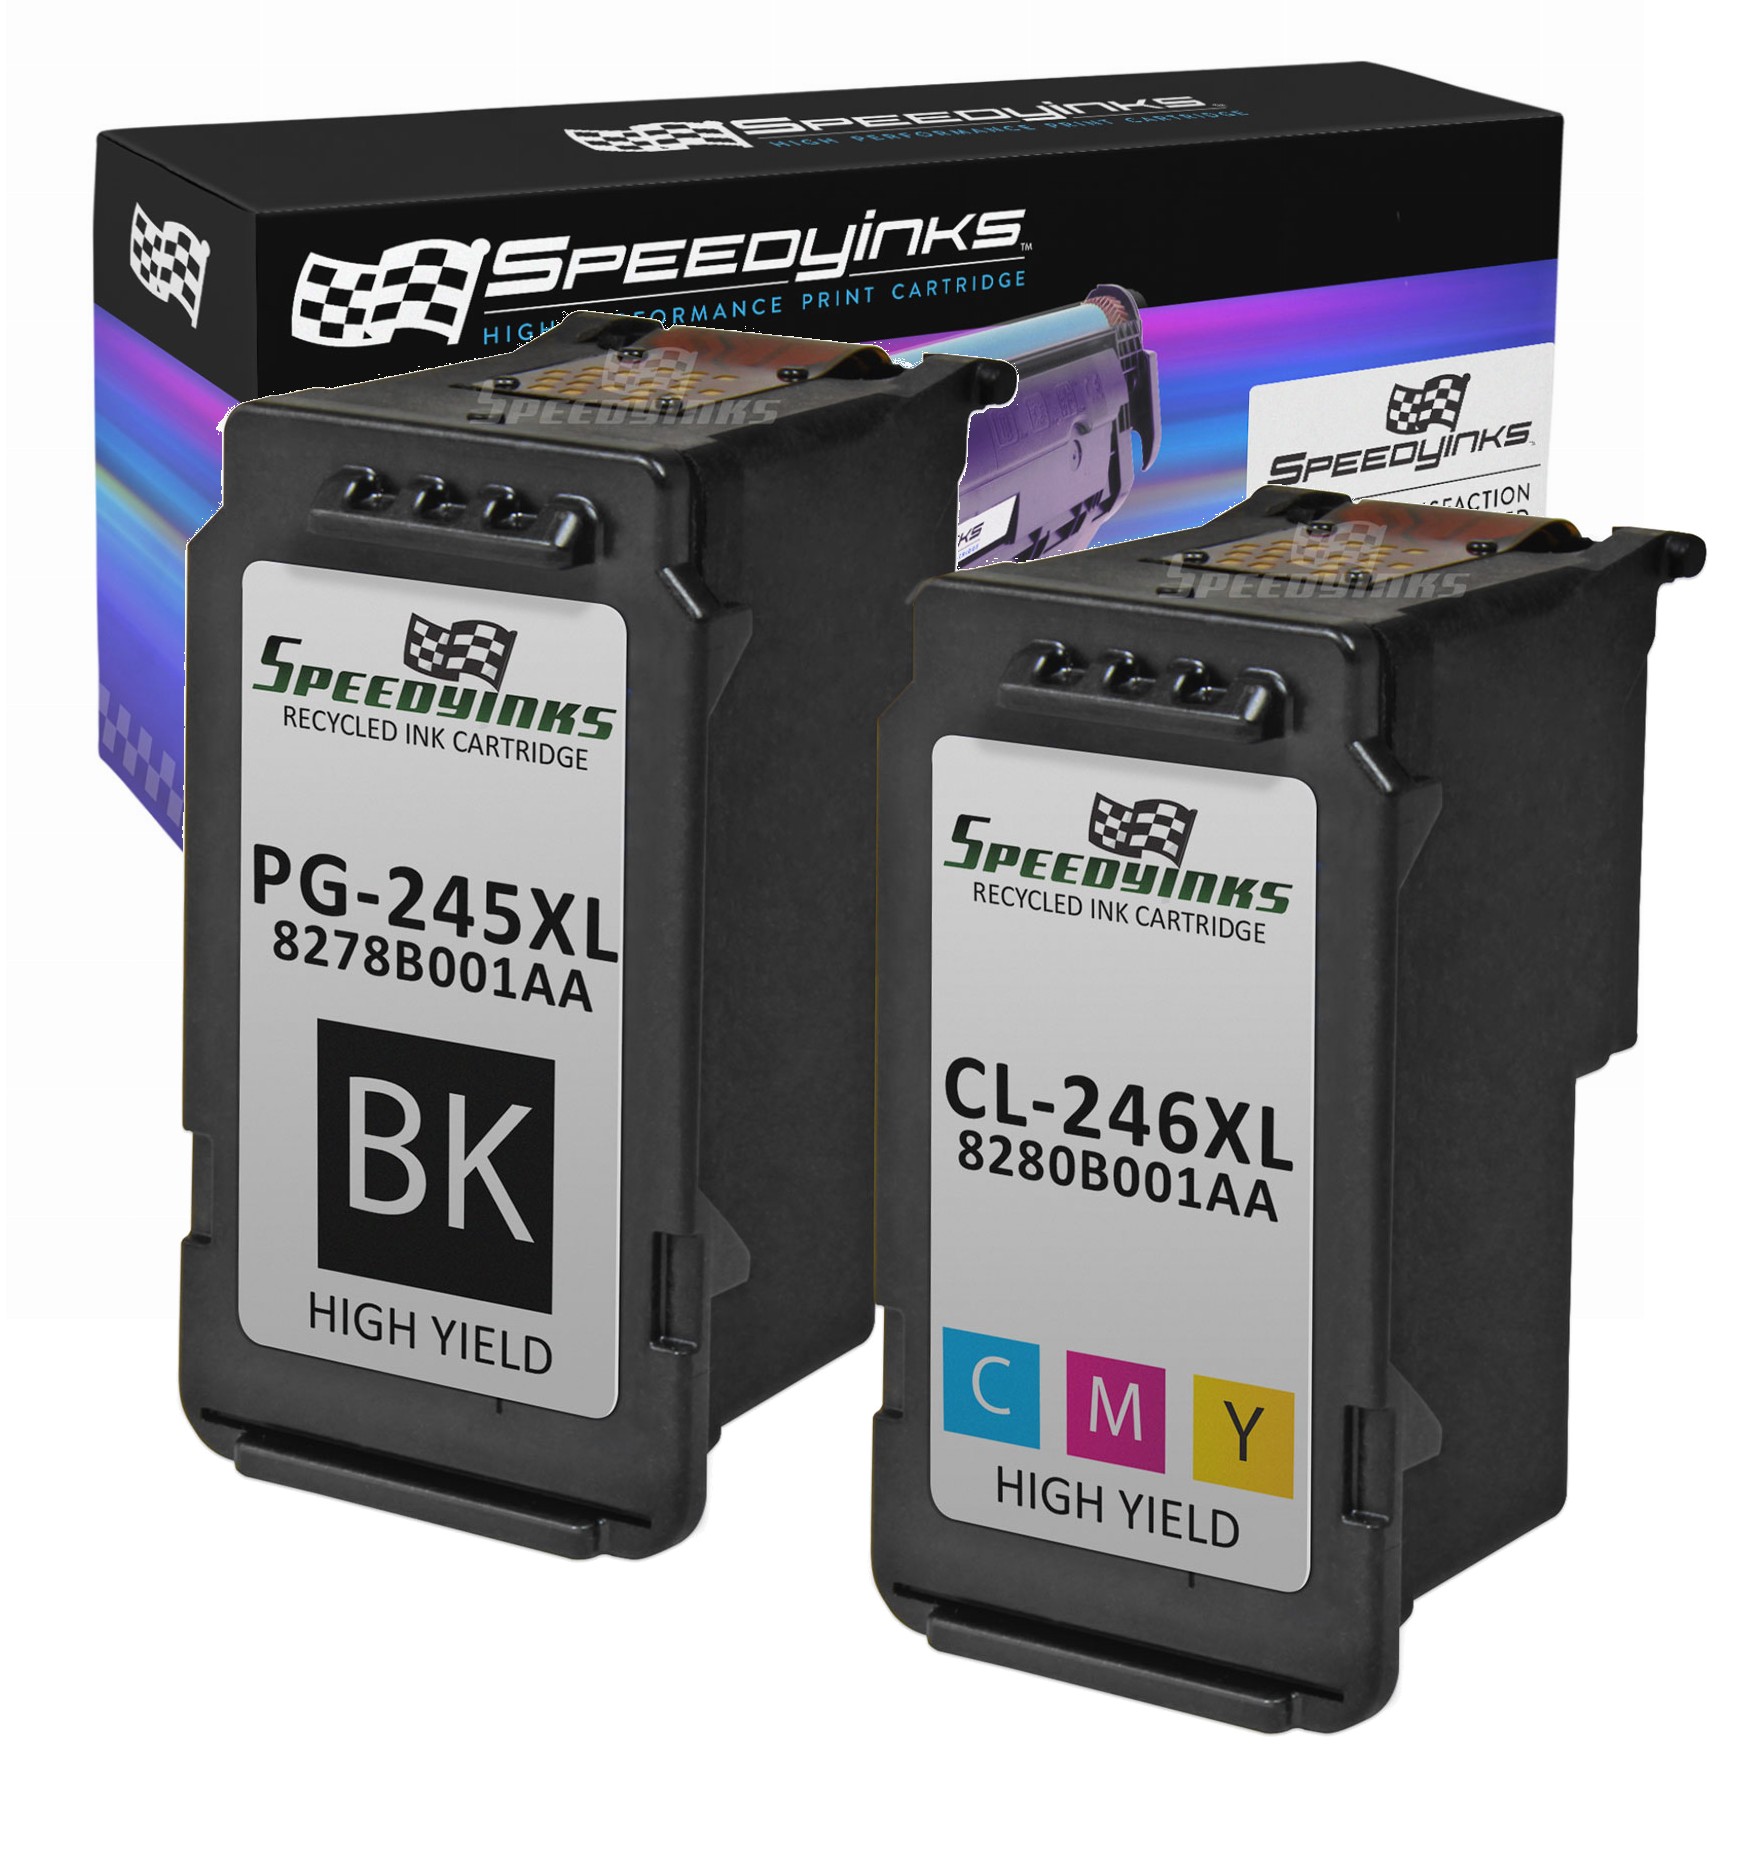 Speedy Inks - Remanufactured Canon PG-245XL / CL-246XL Set of 2 (1 Black 1 Color for use in Canon PIXMA TR4500 / TR4522 / PIXMA MG2420, Canon PIXMA MG2520, Canon Pixma iP2820, Canon Pixma MG2924 - image 1 of 4